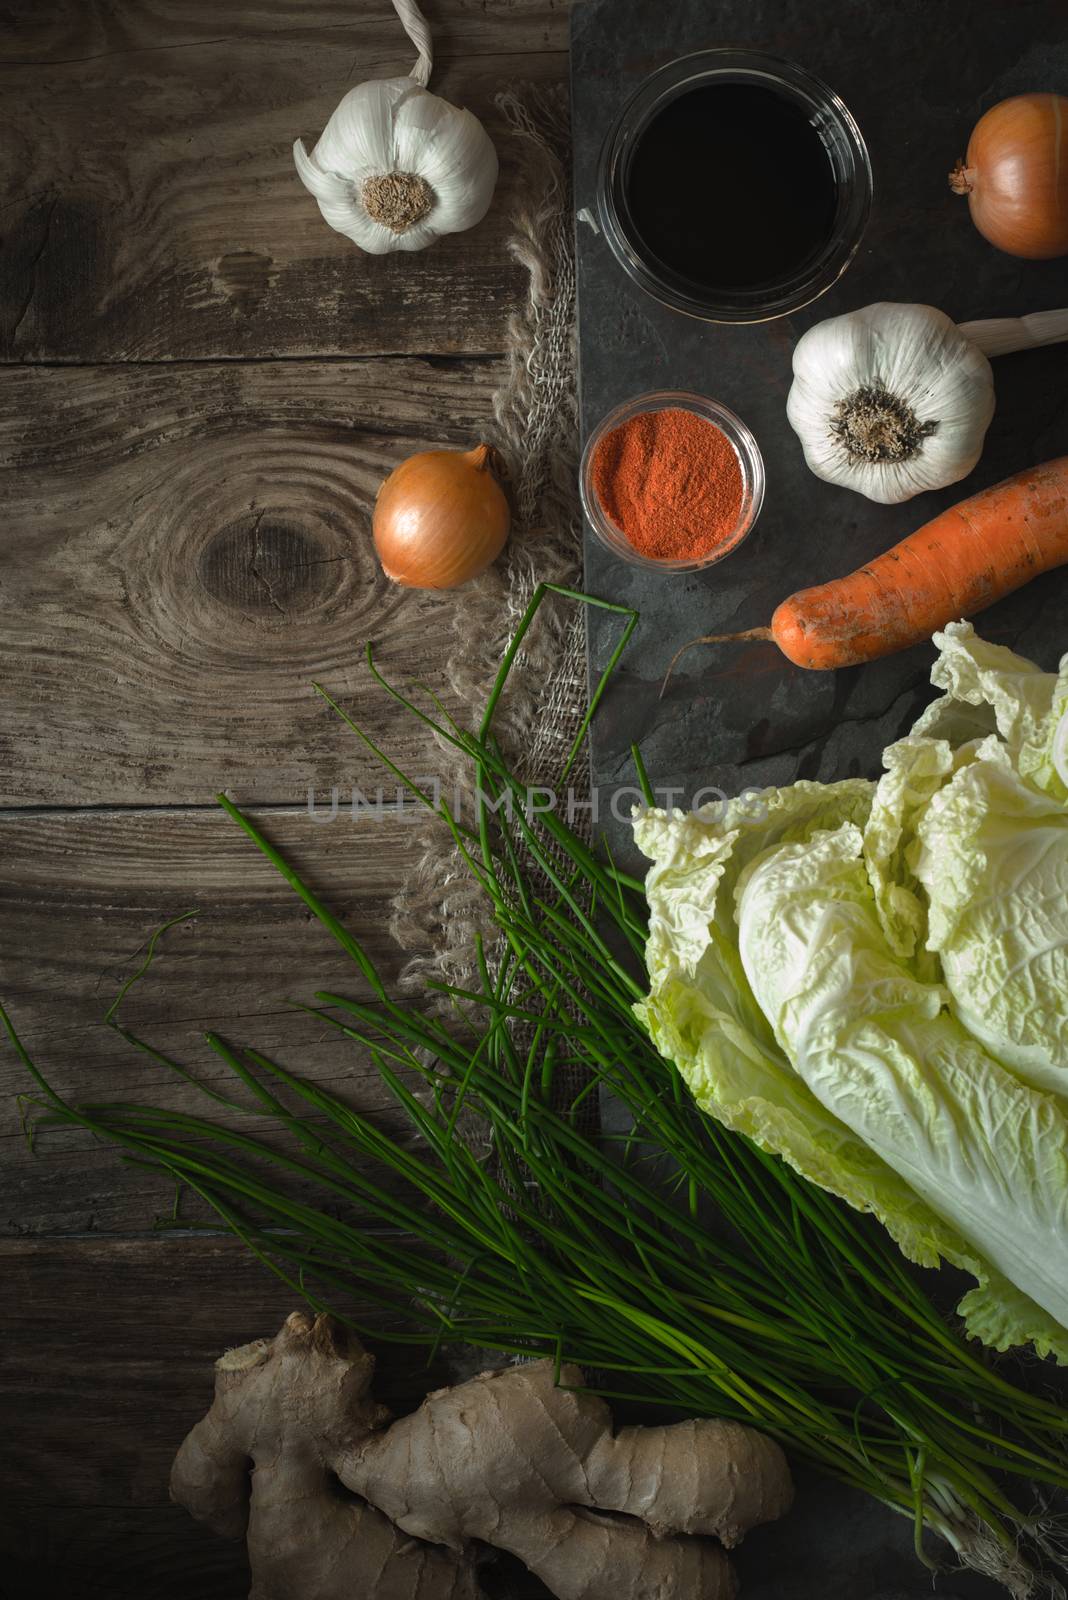 Chinese cabbage, vegetables and soy sauce kimchi on old boards by Deniskarpenkov